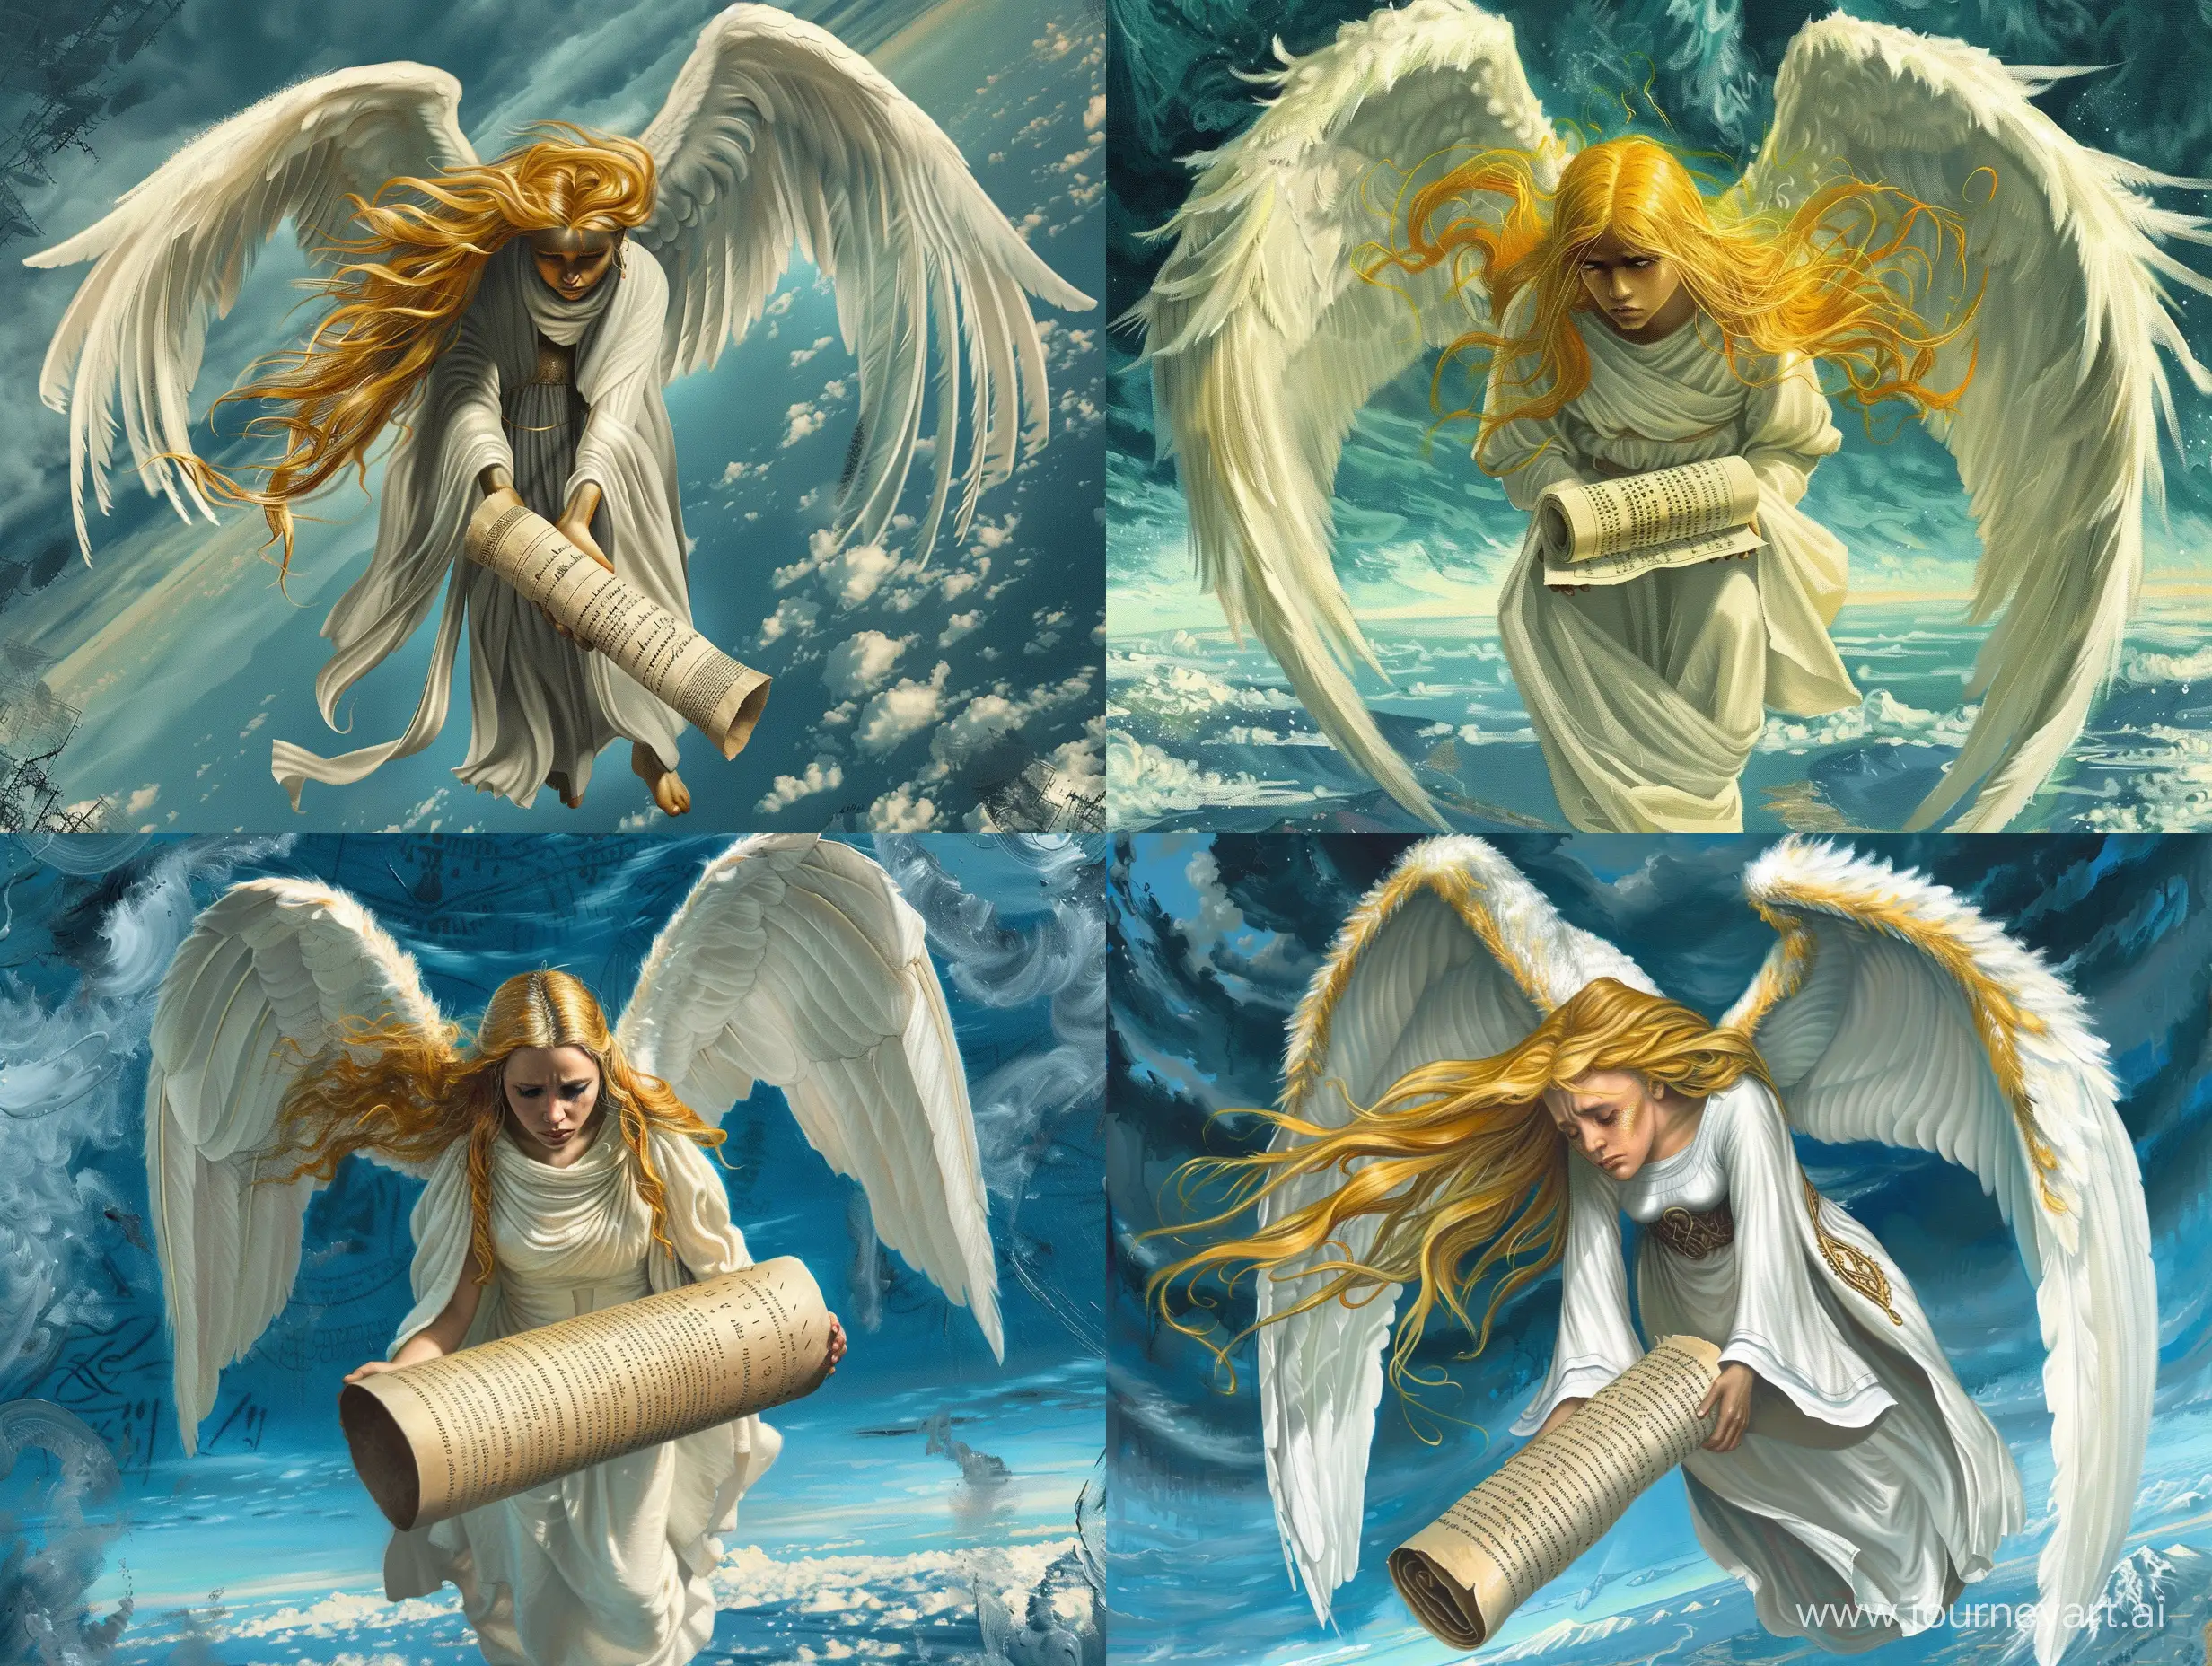 Surreal-Sad-Angel-with-Long-Gold-Hair-and-Ancient-Parchment-Roll